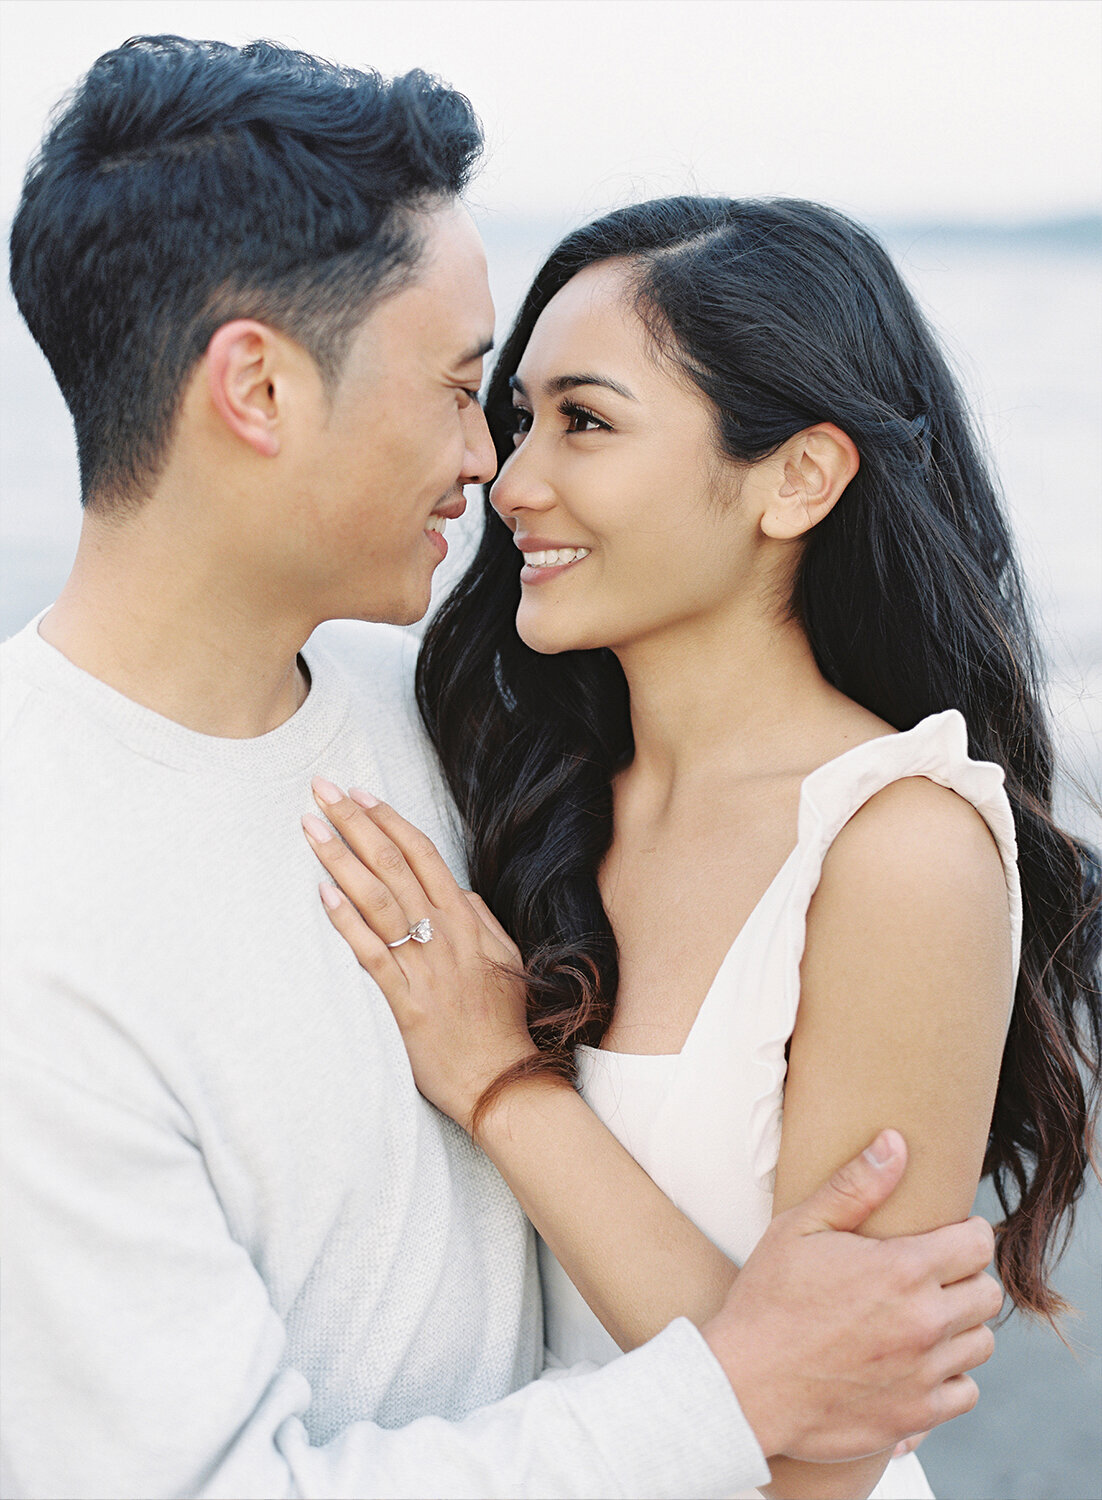 Seattle City Engagement Session on Film - Tetiana Photography - D&AJ - 12